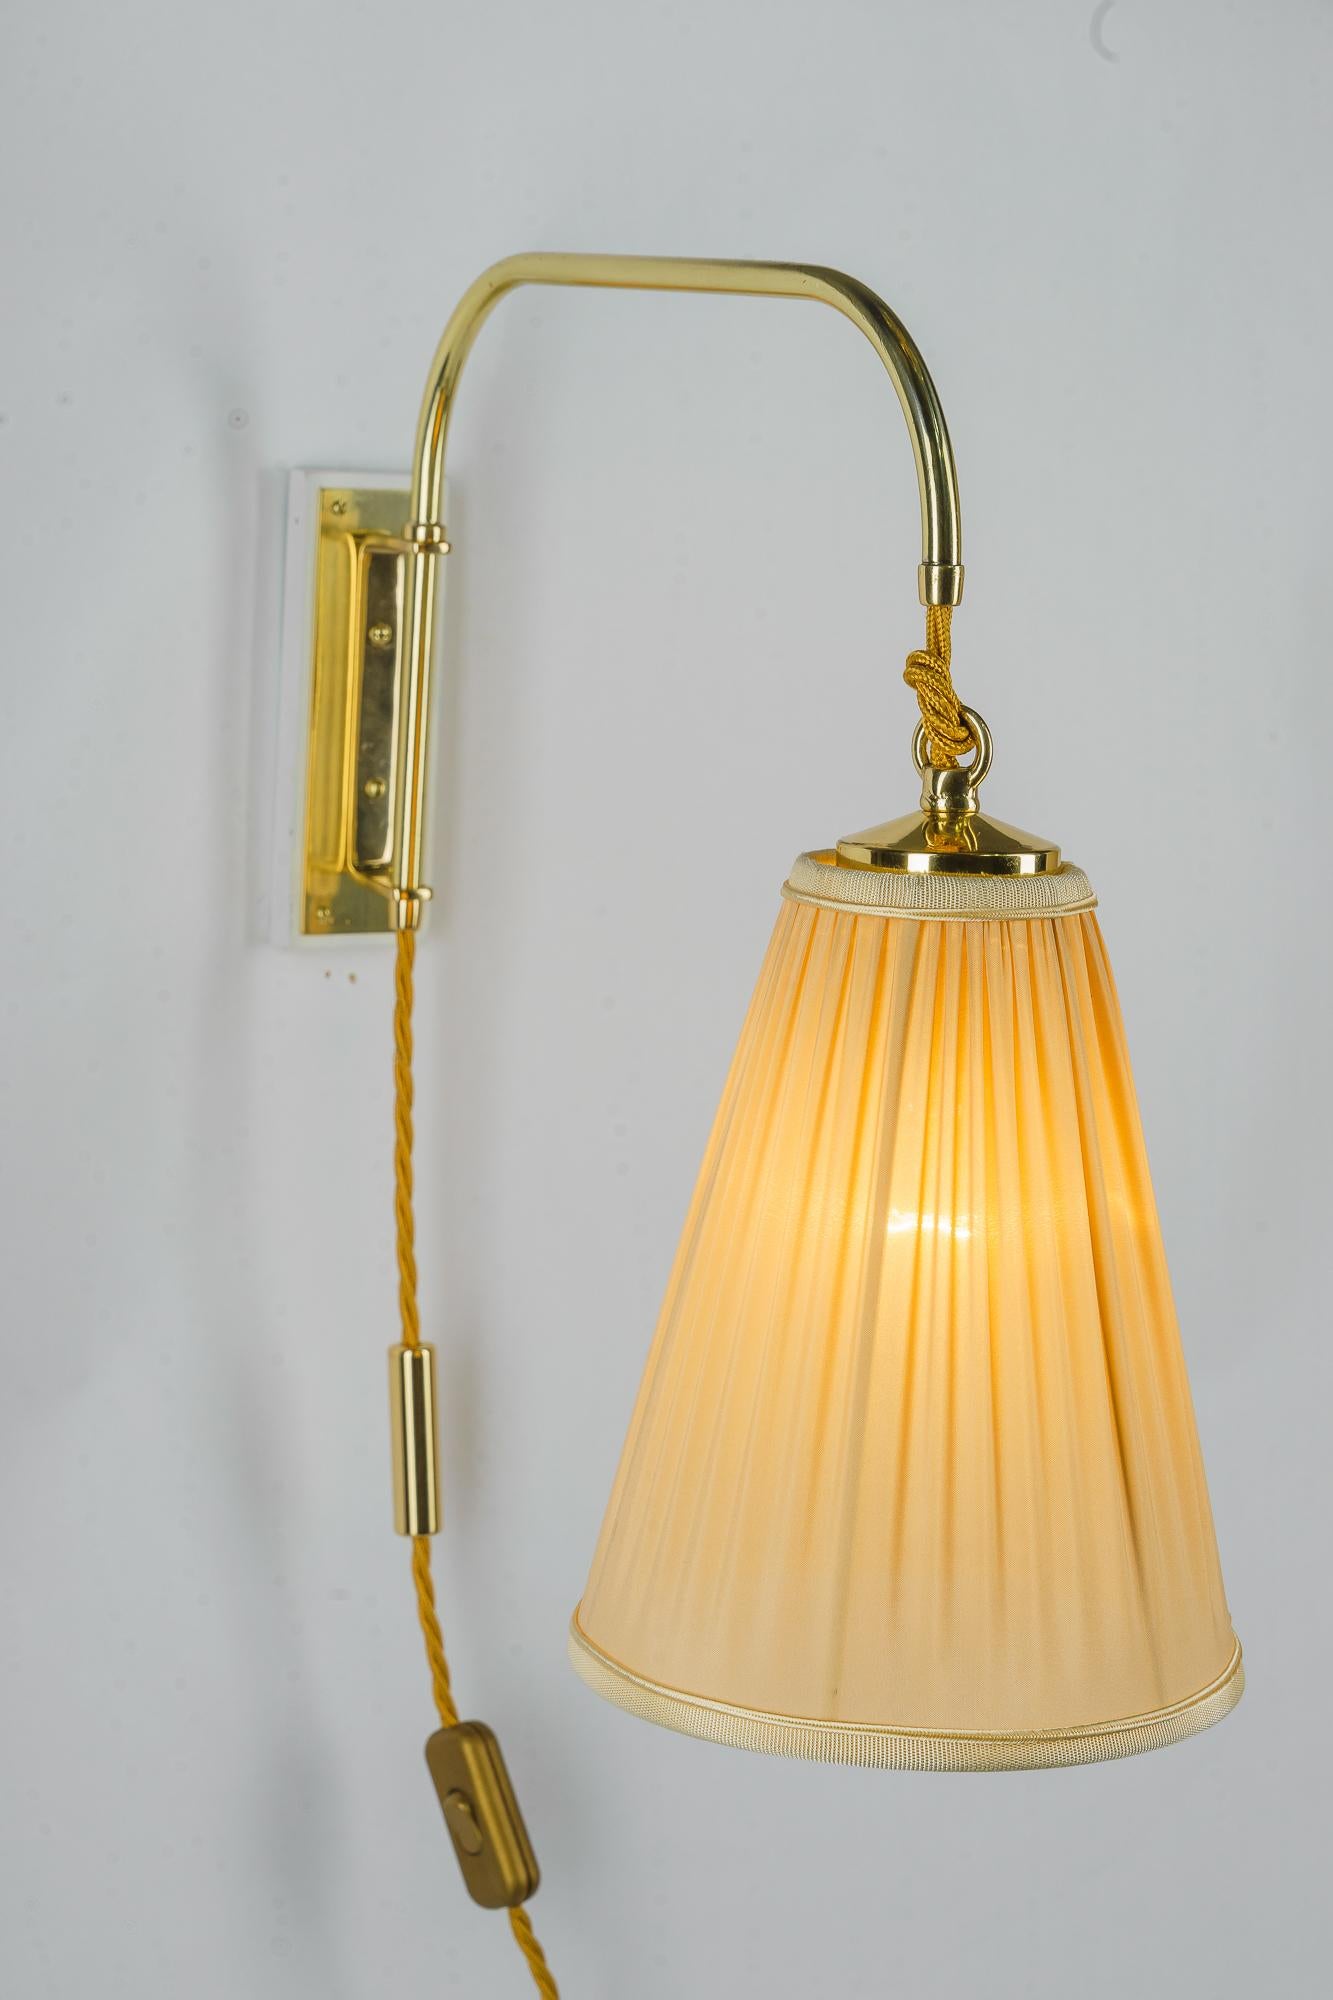  Cable in height adjustable art deco wall lamp 1920s For Sale 2